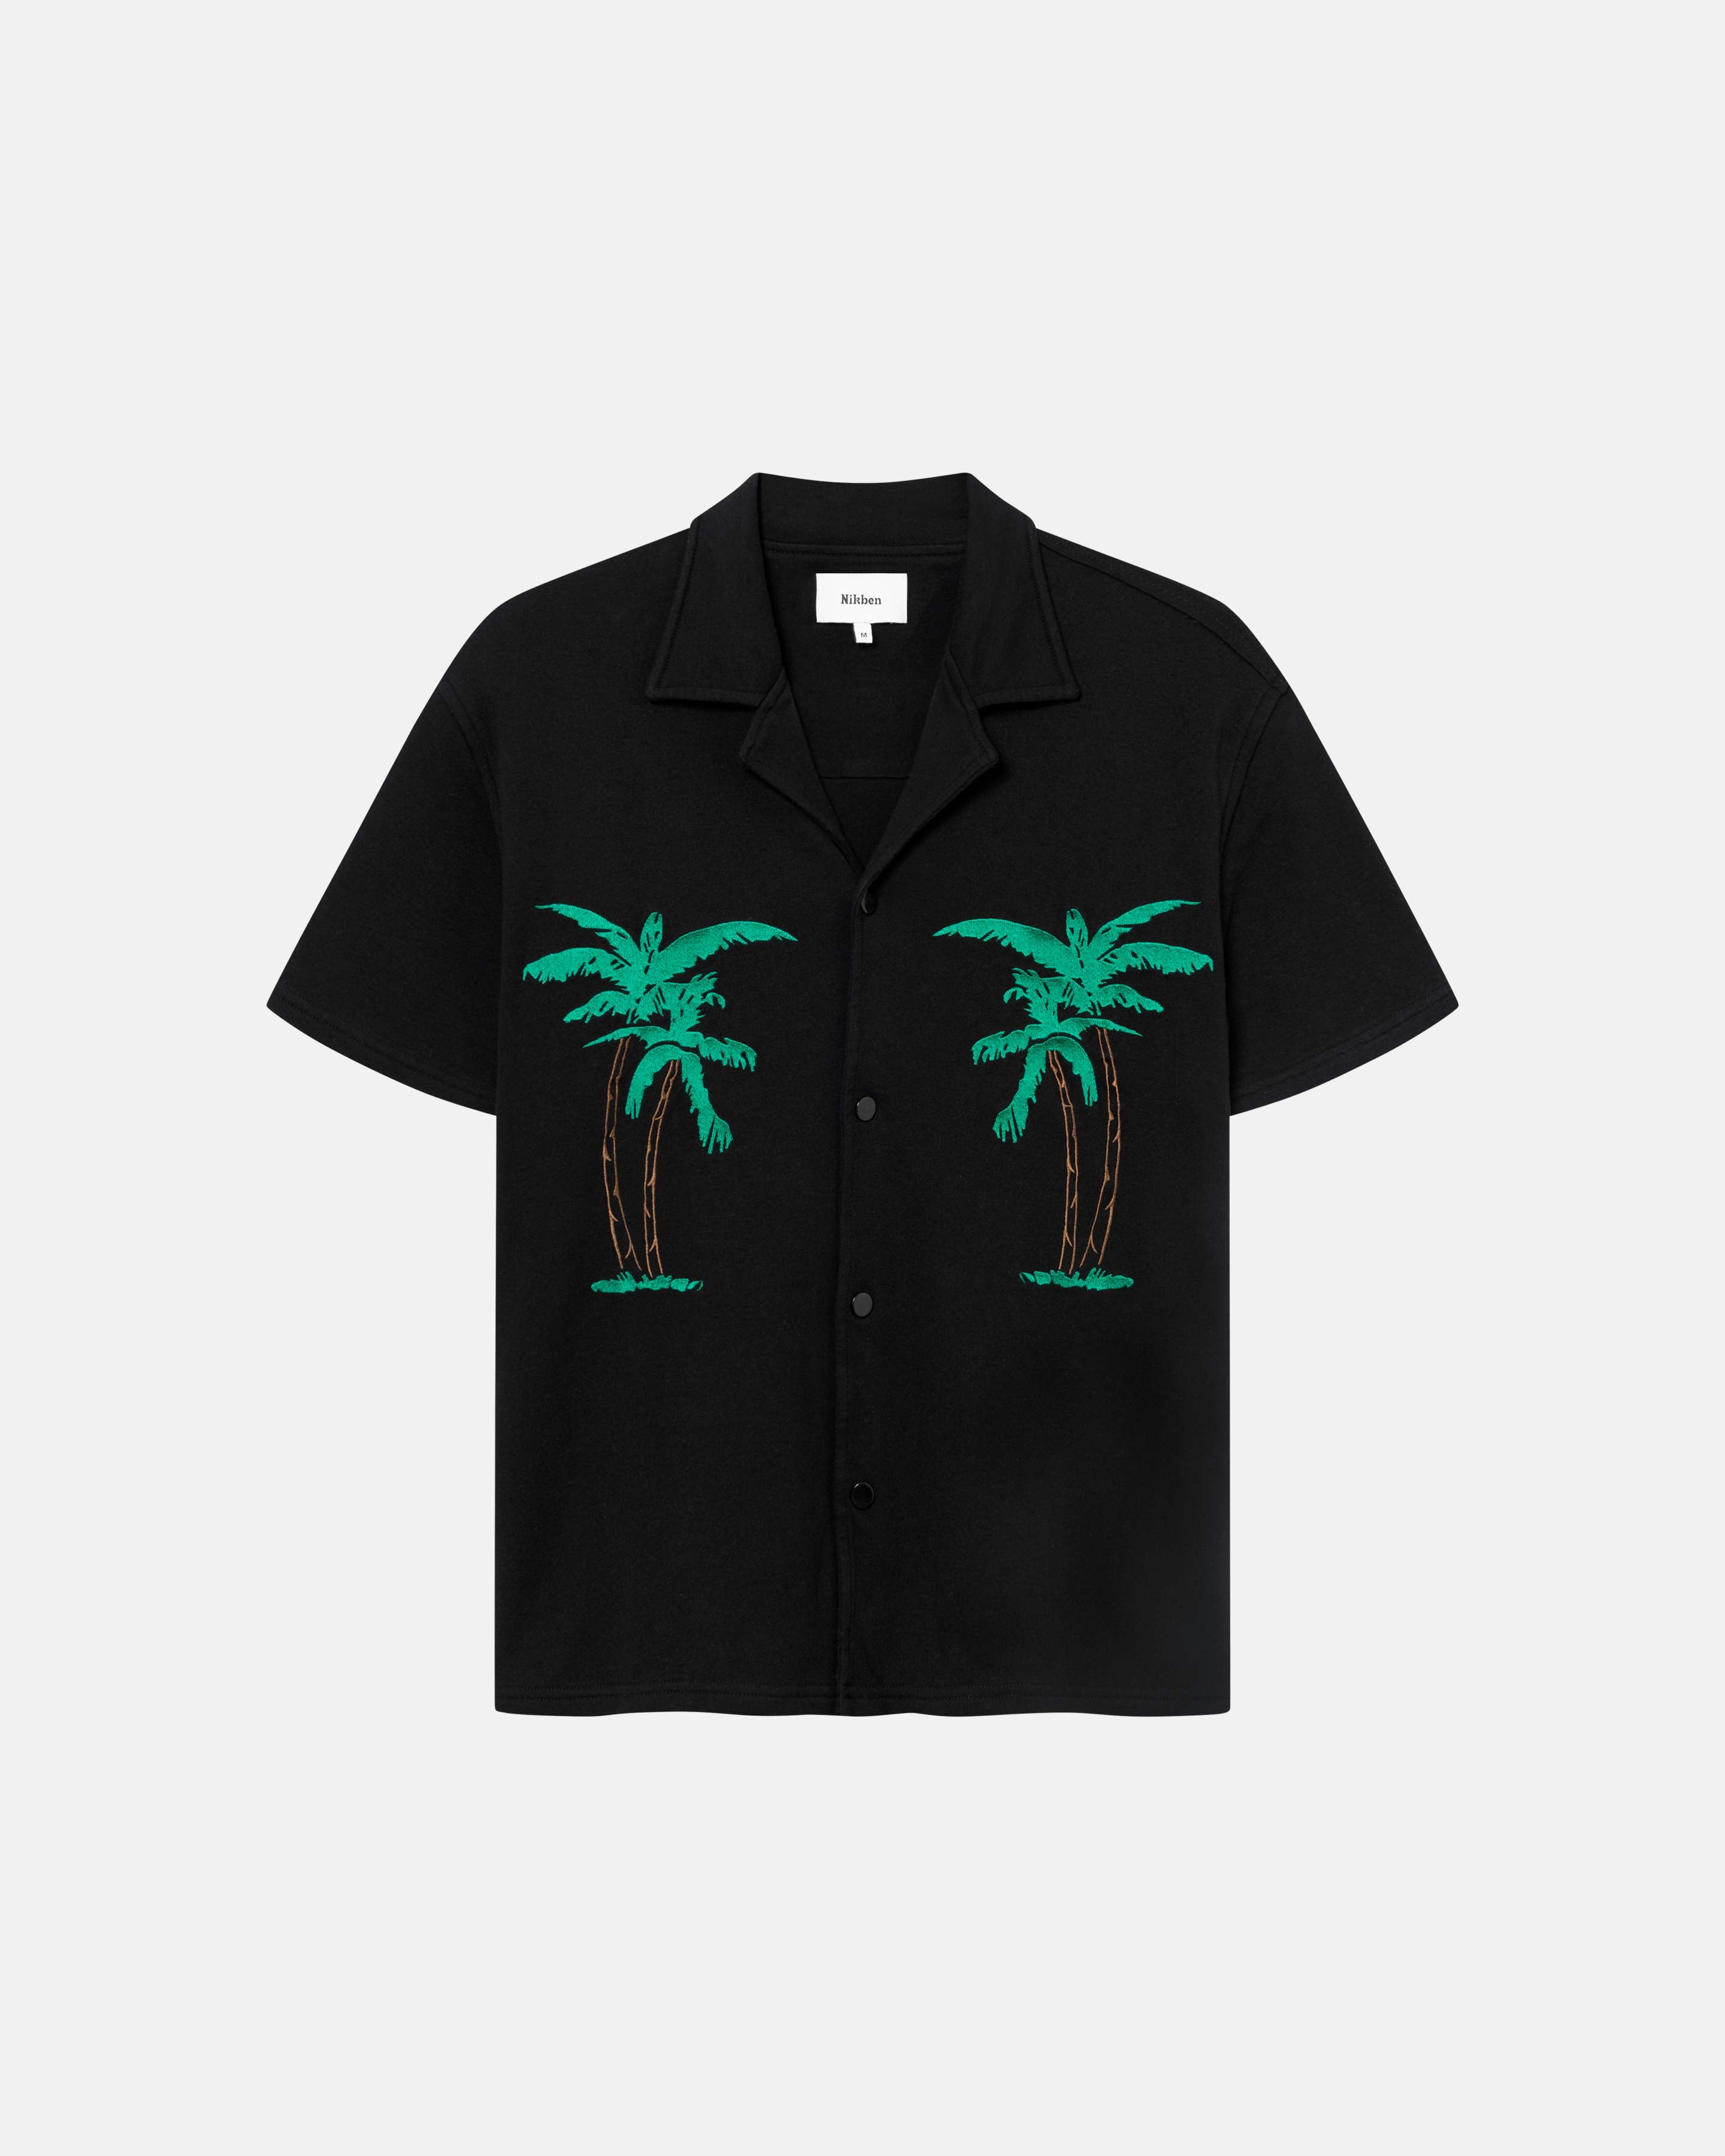 Black short-sleeved shirt with palm tree embroidery